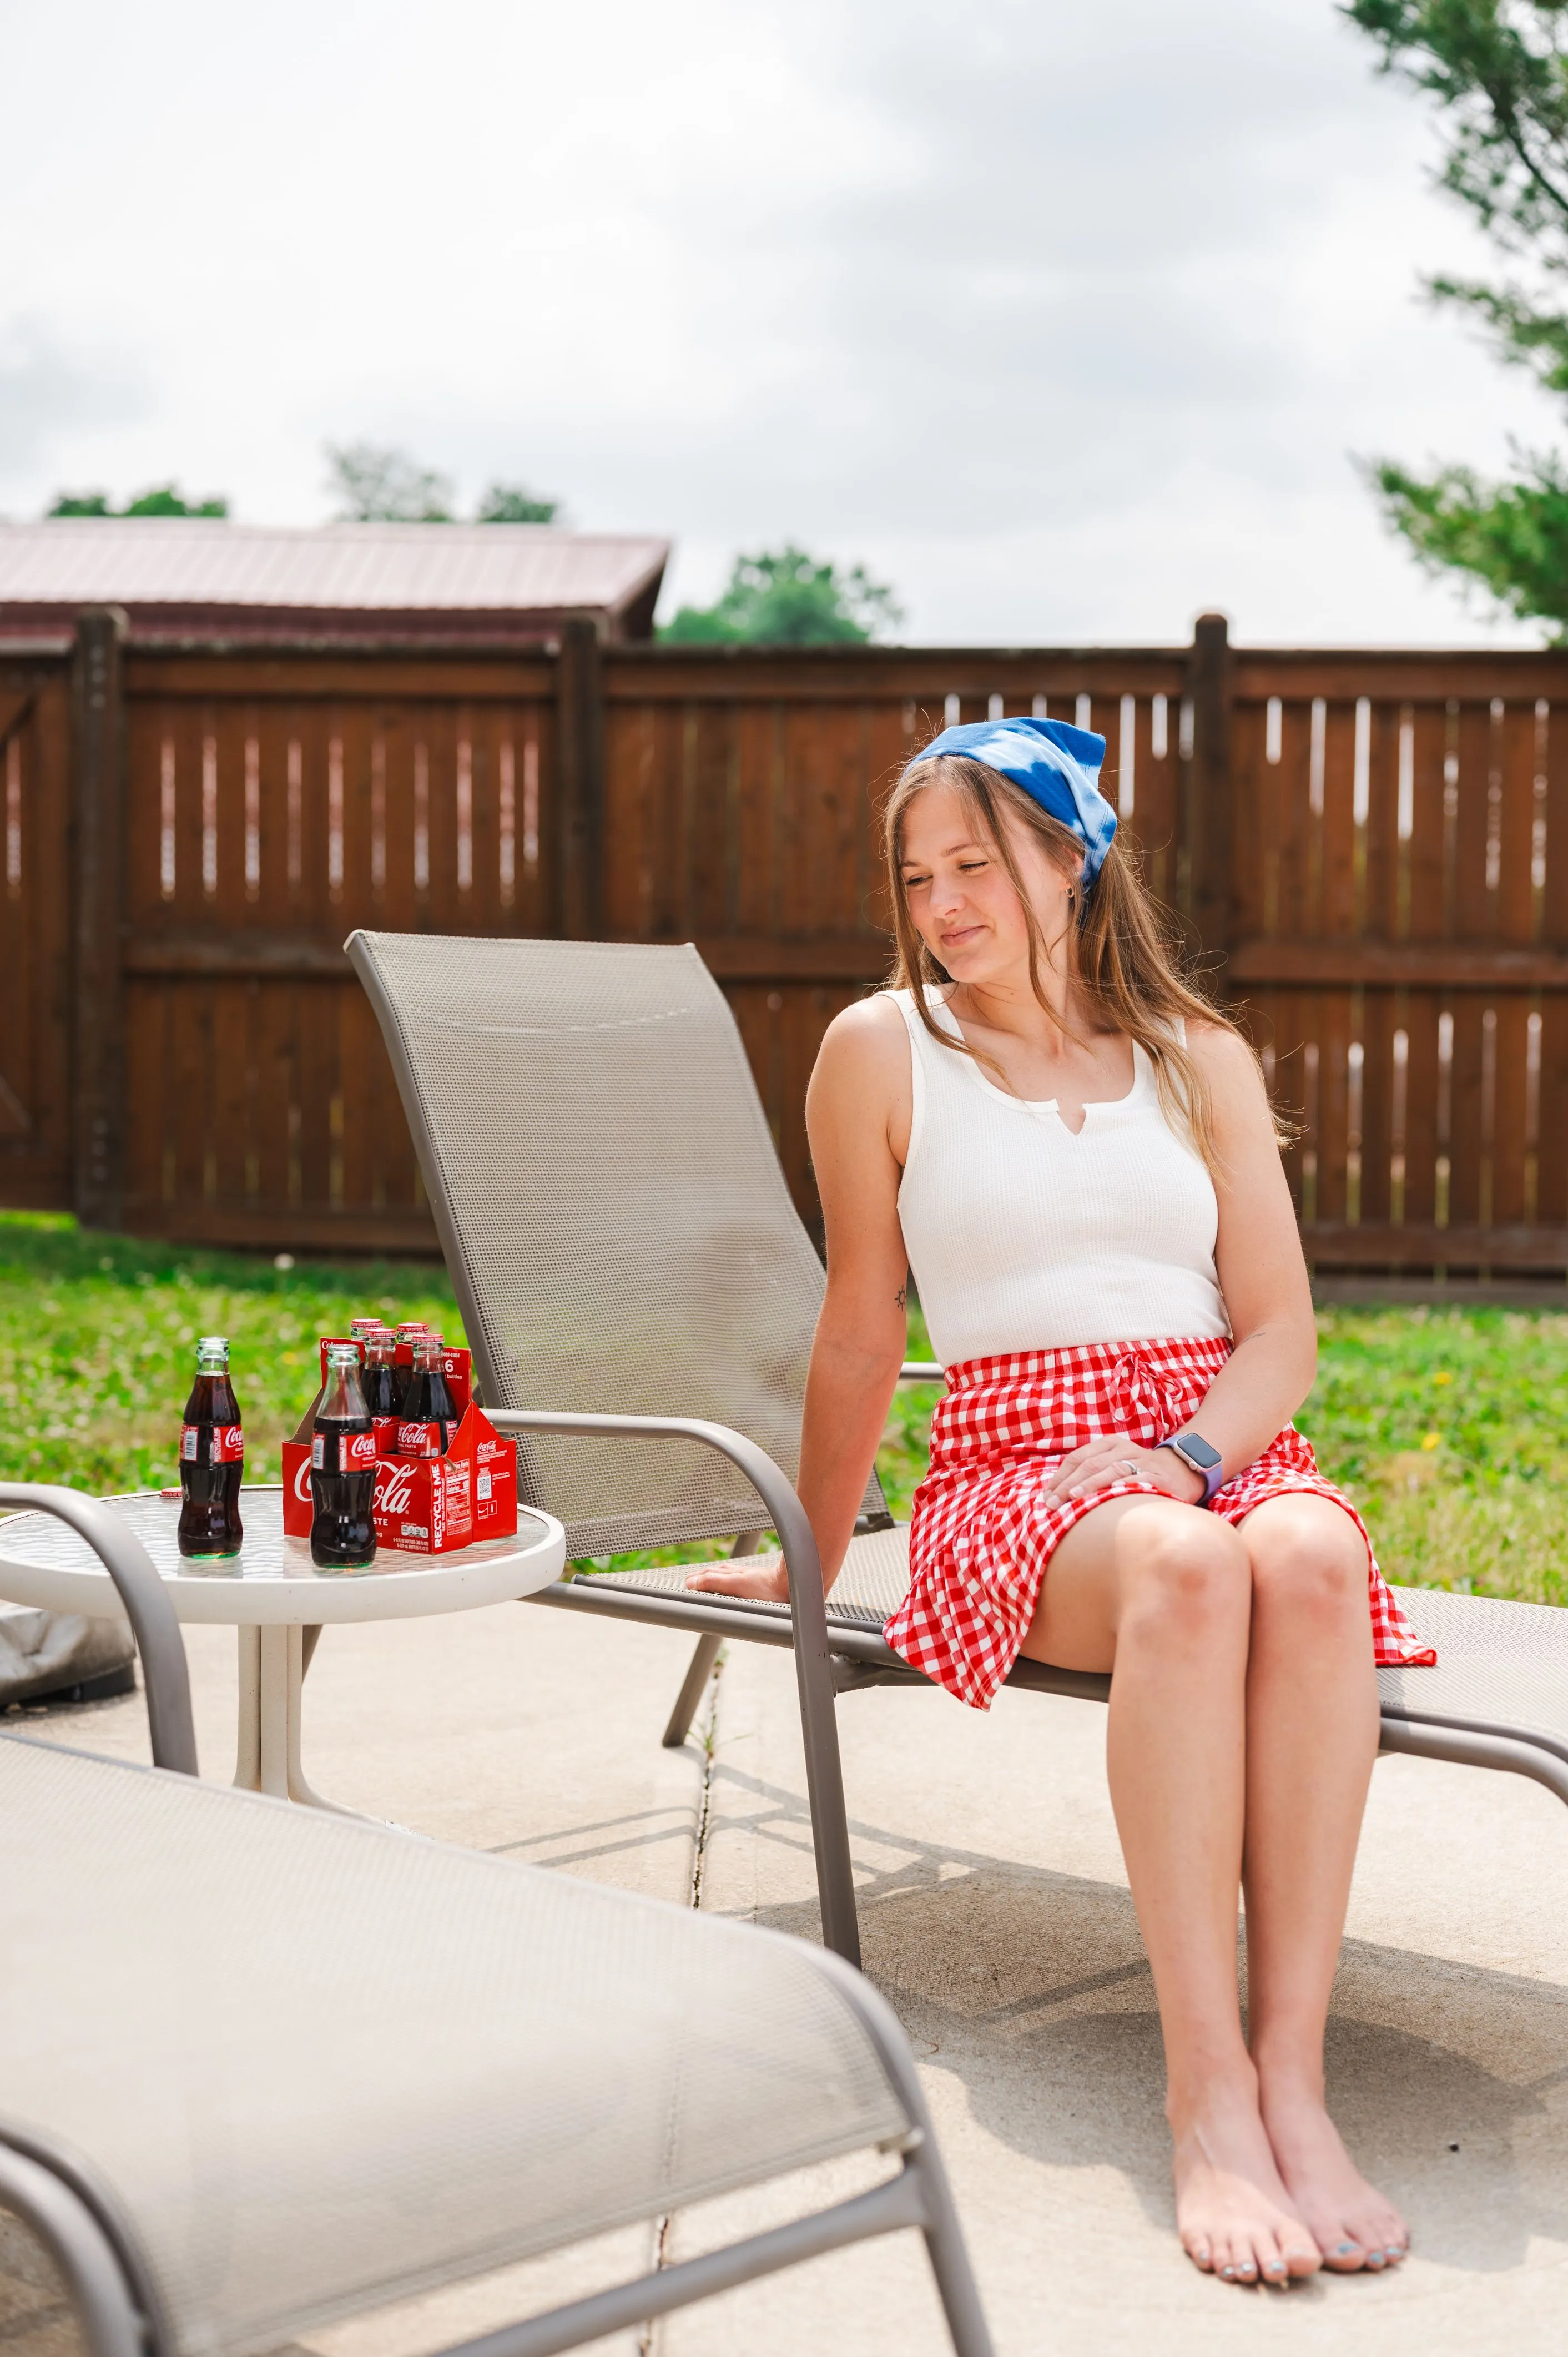 Woman in a white tank top and red checkered skirt sitting outside next to a table with bottles of Coca-Cola.